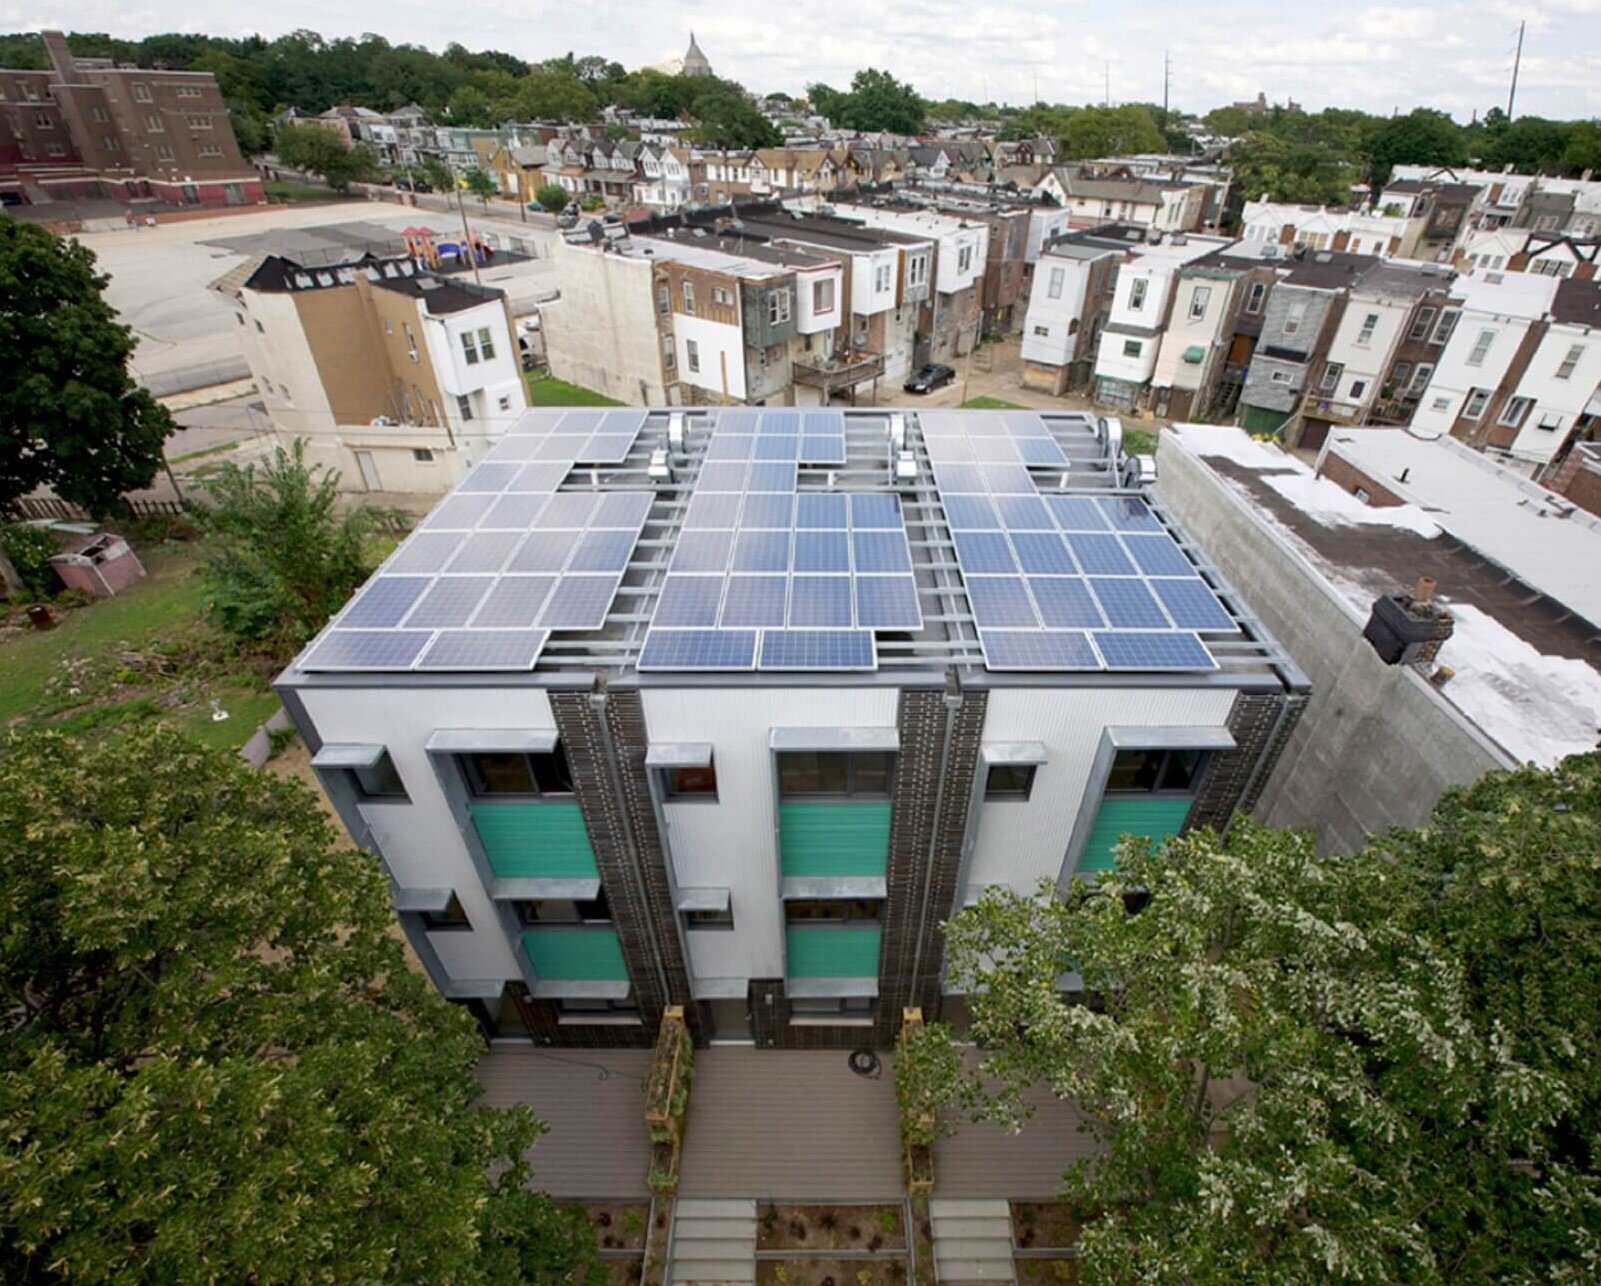 Modern, sustainable multifamily housing; ariel shot showing solar panels on roof, trees and rowhomes surrounding